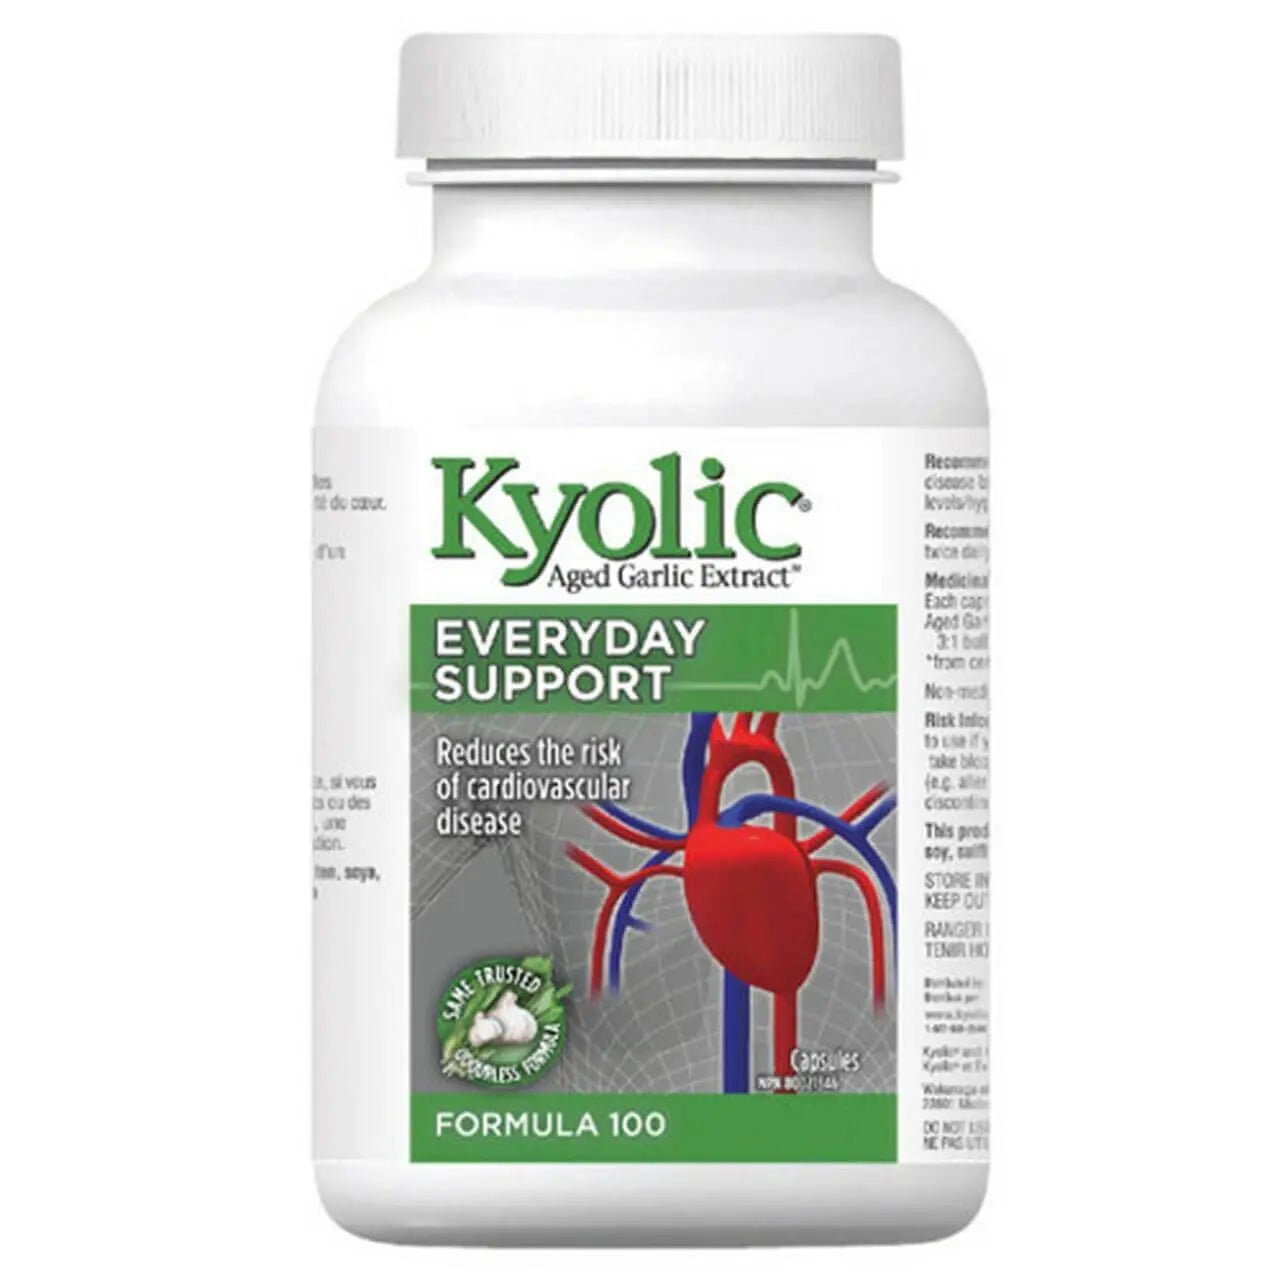 Kyolic Aged Garlic Extract, Formula 100, Everyday Support - Nutrition Plus